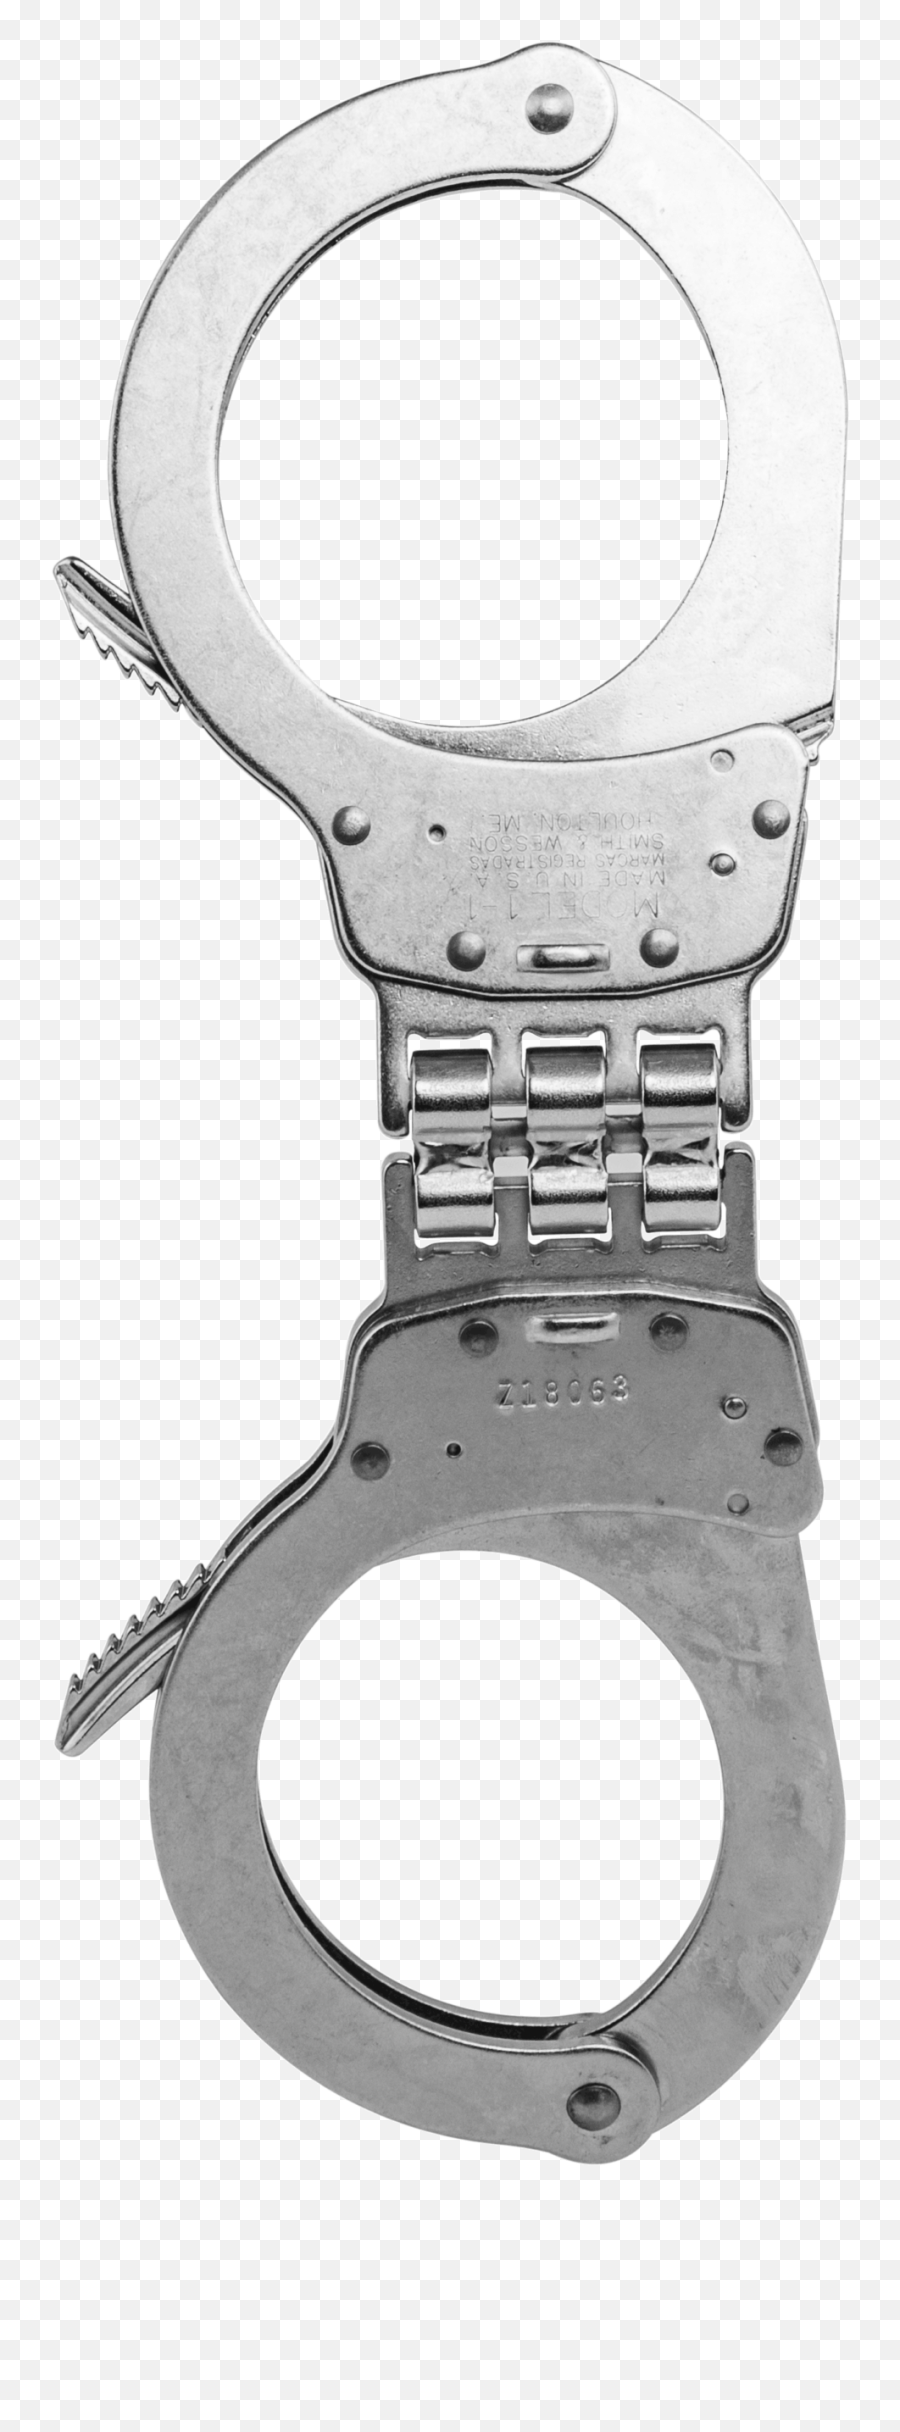 Smith U0026 Wesson 350133 1h - 1 Hinged Universal Handcuffs Nickel Solid Png,Handcuffs Transparent